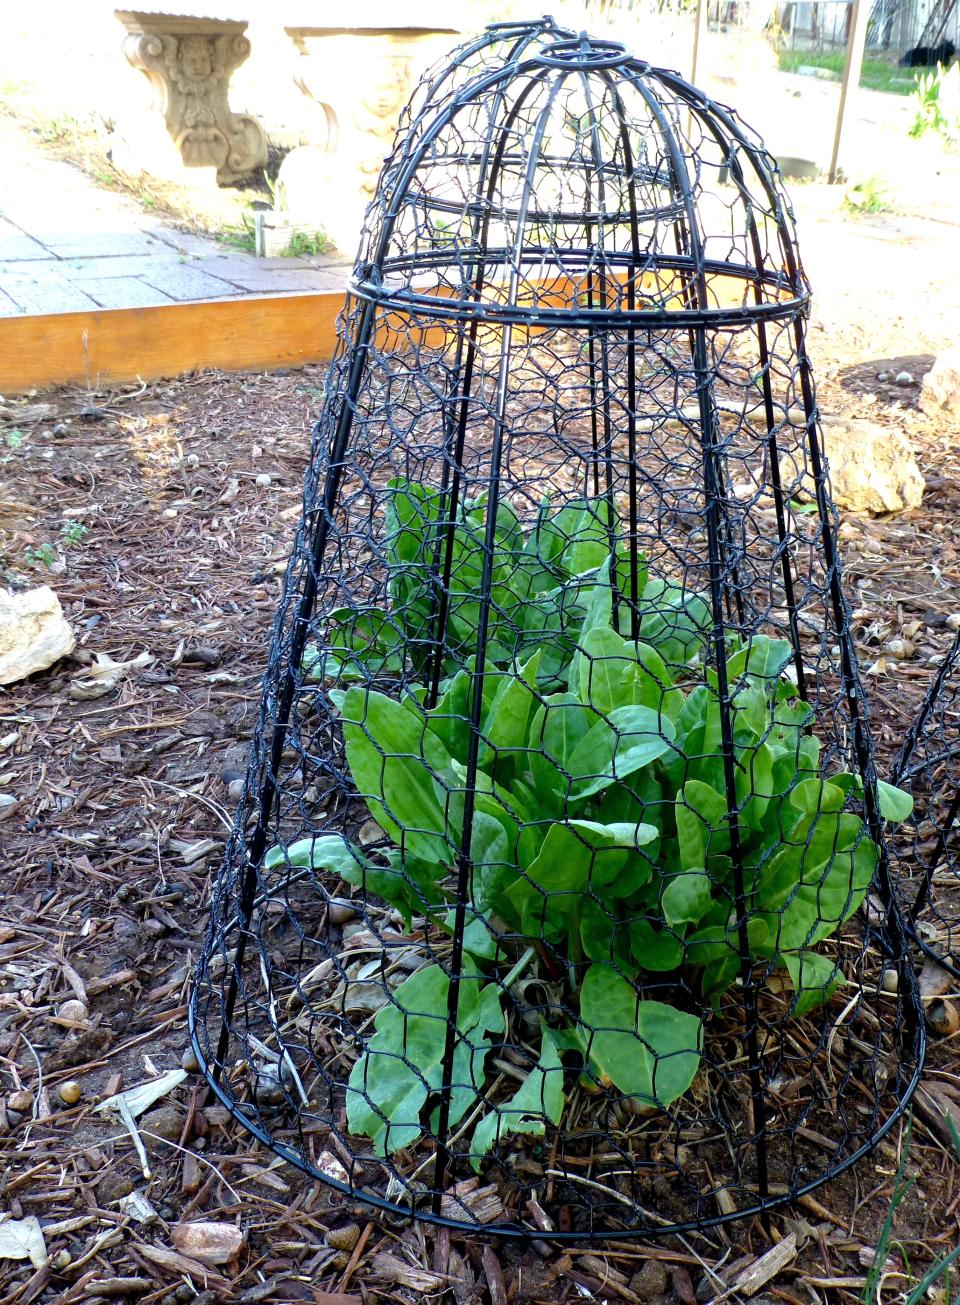 A garden cloche fashioned from wire is protecting lush spring sorrel greens from rabbits. Garden cloches with their domed, bell shapes give elegance to a garden while functioning as botanic safeguards.